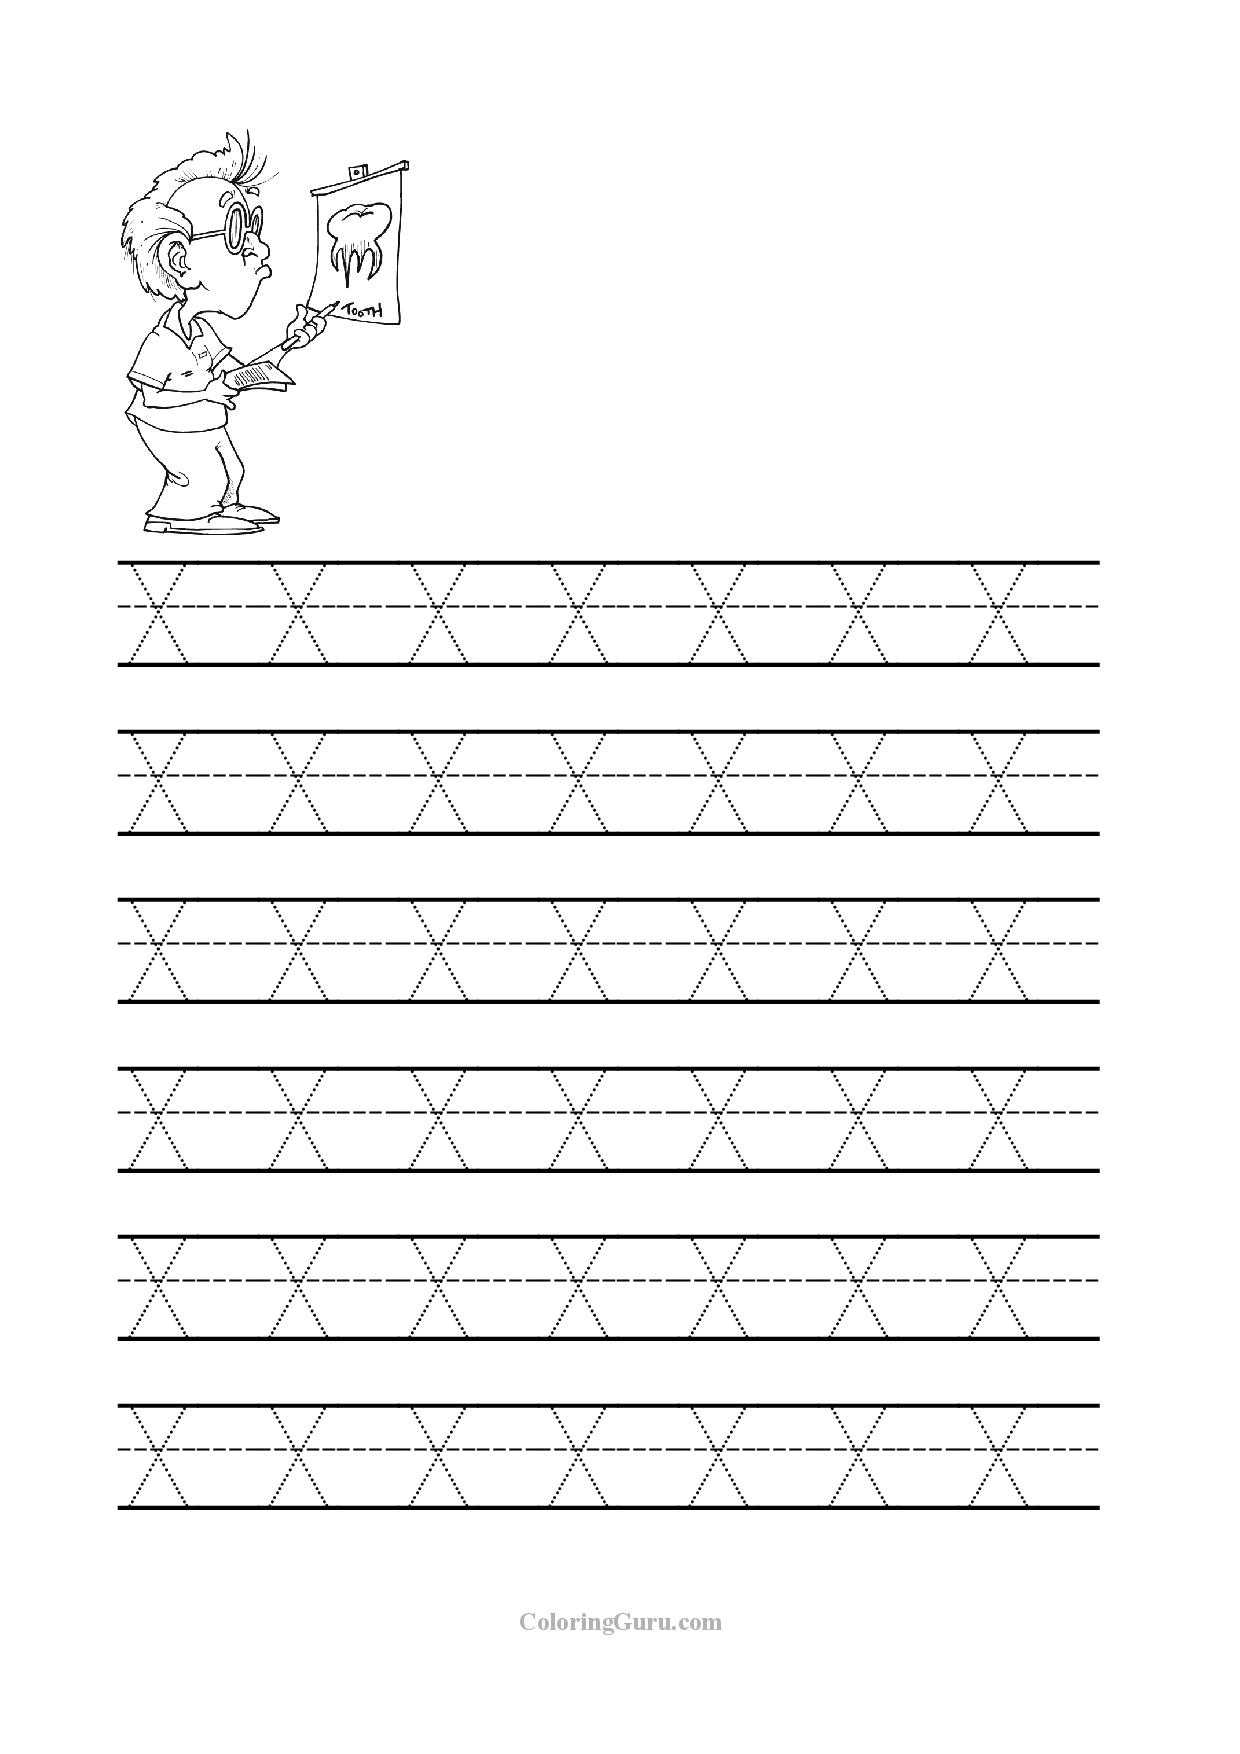 English to Metric Conversion Worksheet together with Letter X Printables for Preschool Myscres